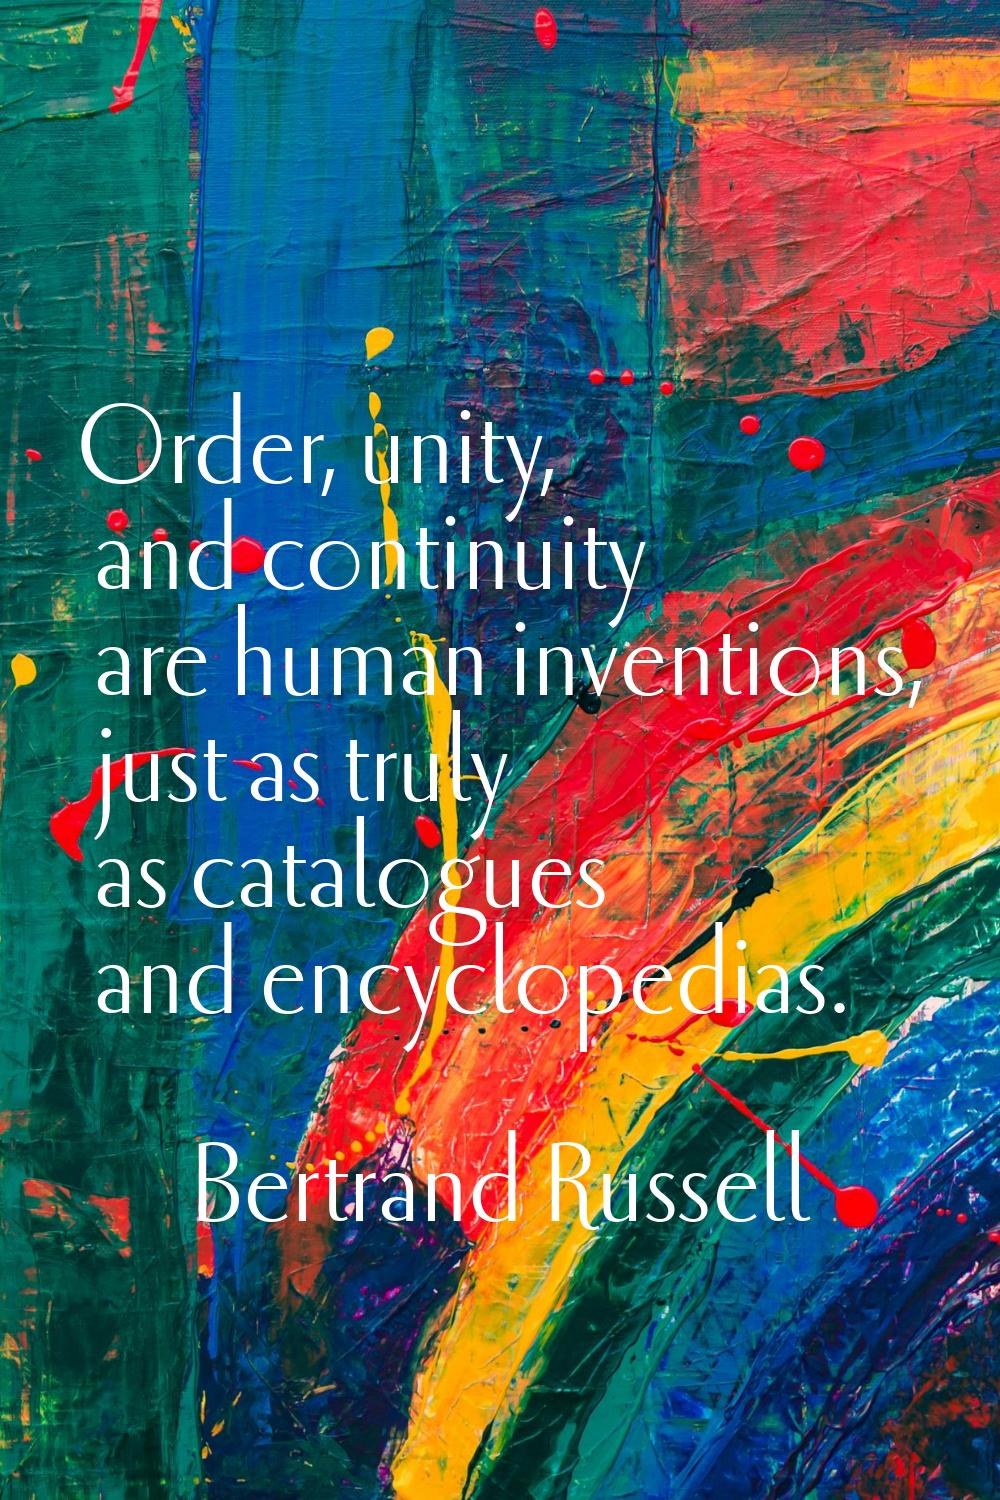 Order, unity, and continuity are human inventions, just as truly as catalogues and encyclopedias.